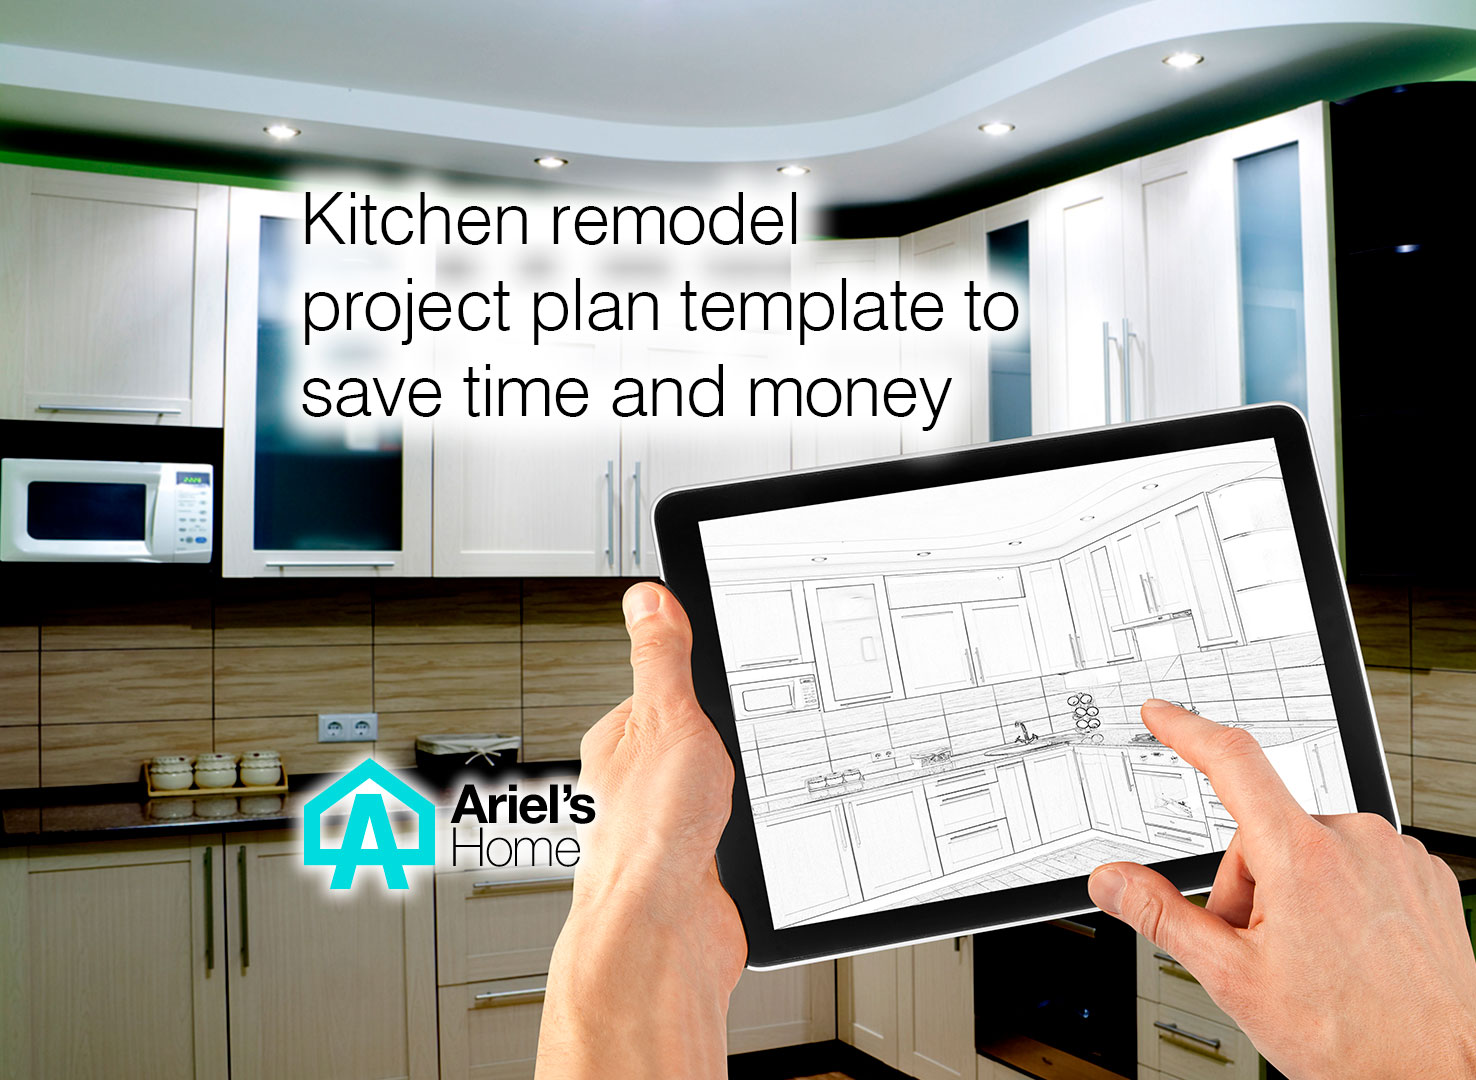 kitchen-remodel-project-plan-template-2023-ariel-s-home